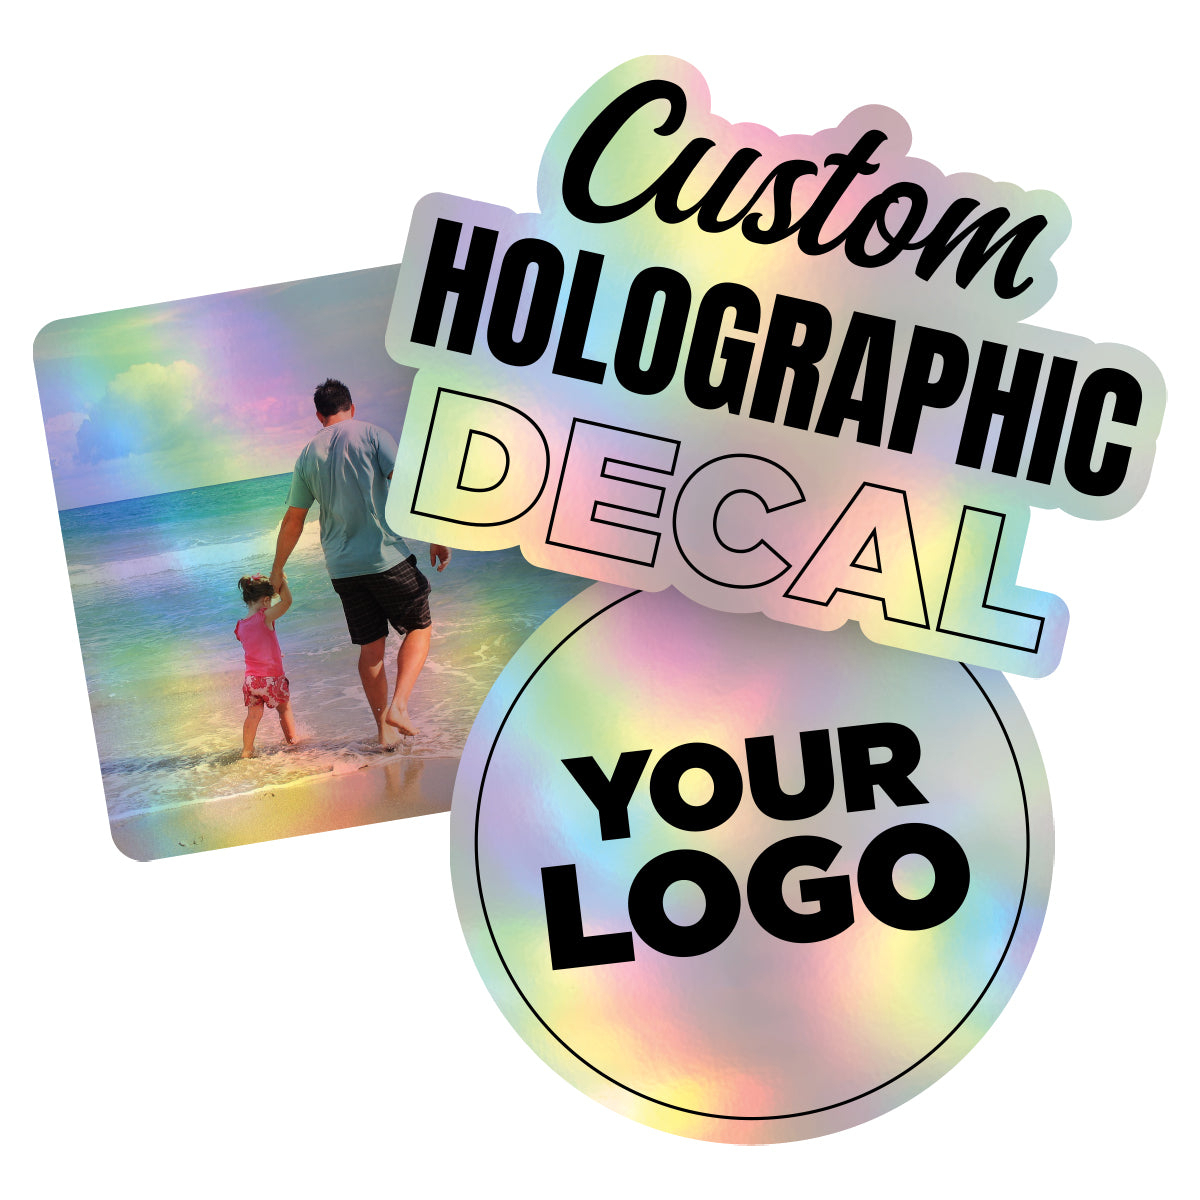 Personalized Holographic Vinyl Sticker Decal Custom Made Any Logo, Image, Text, Or Name Die Cut To Shape - Single, 8 Inch, Circle